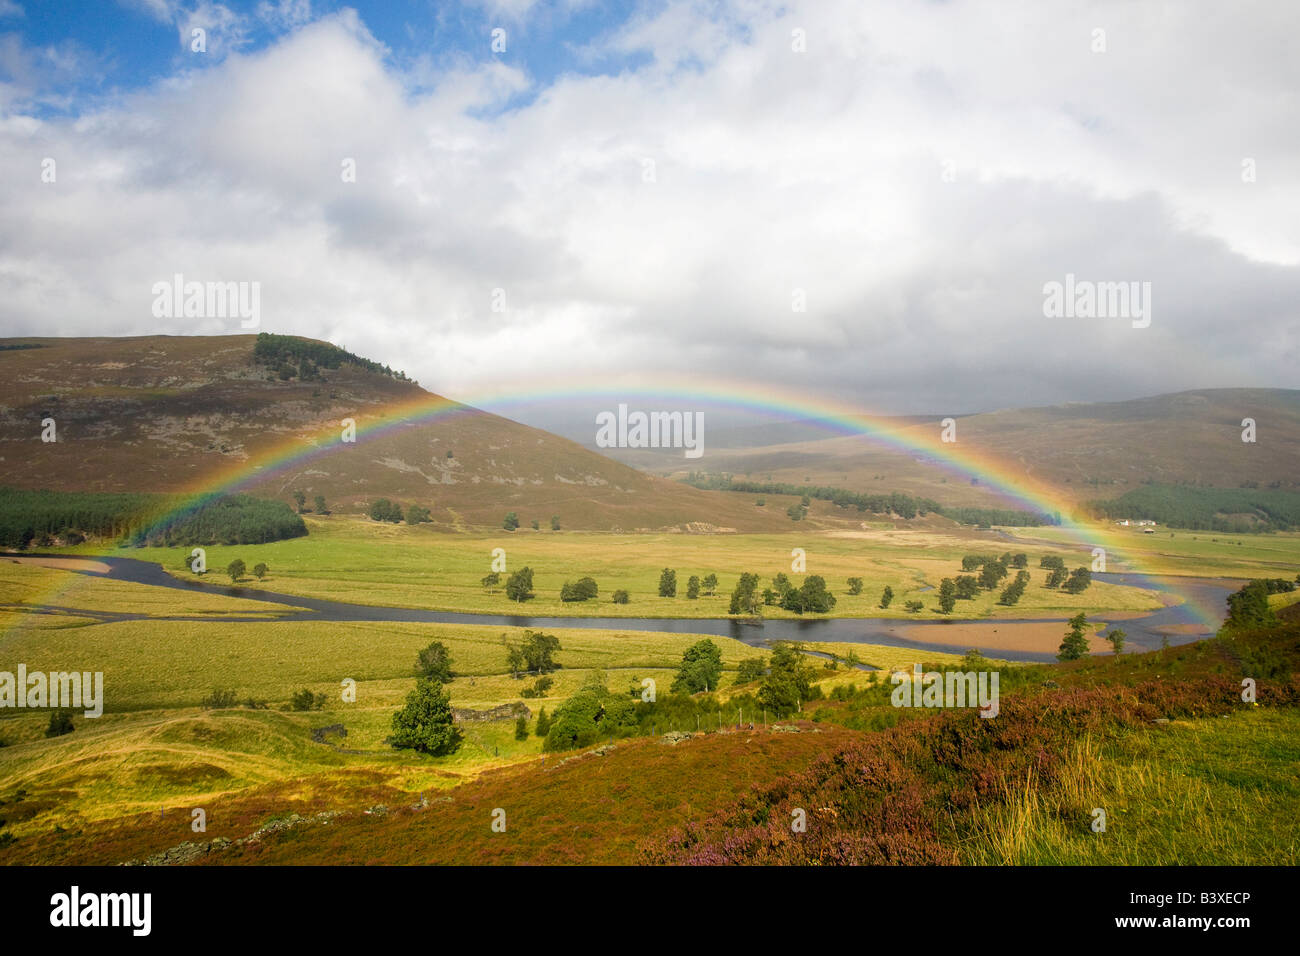 Scottish Highland scene, landscape of the River Dee  at Braemar with rainbow_Royal Deeside, Cairngorms National Park, Aberdeenshire, UK Stock Photo